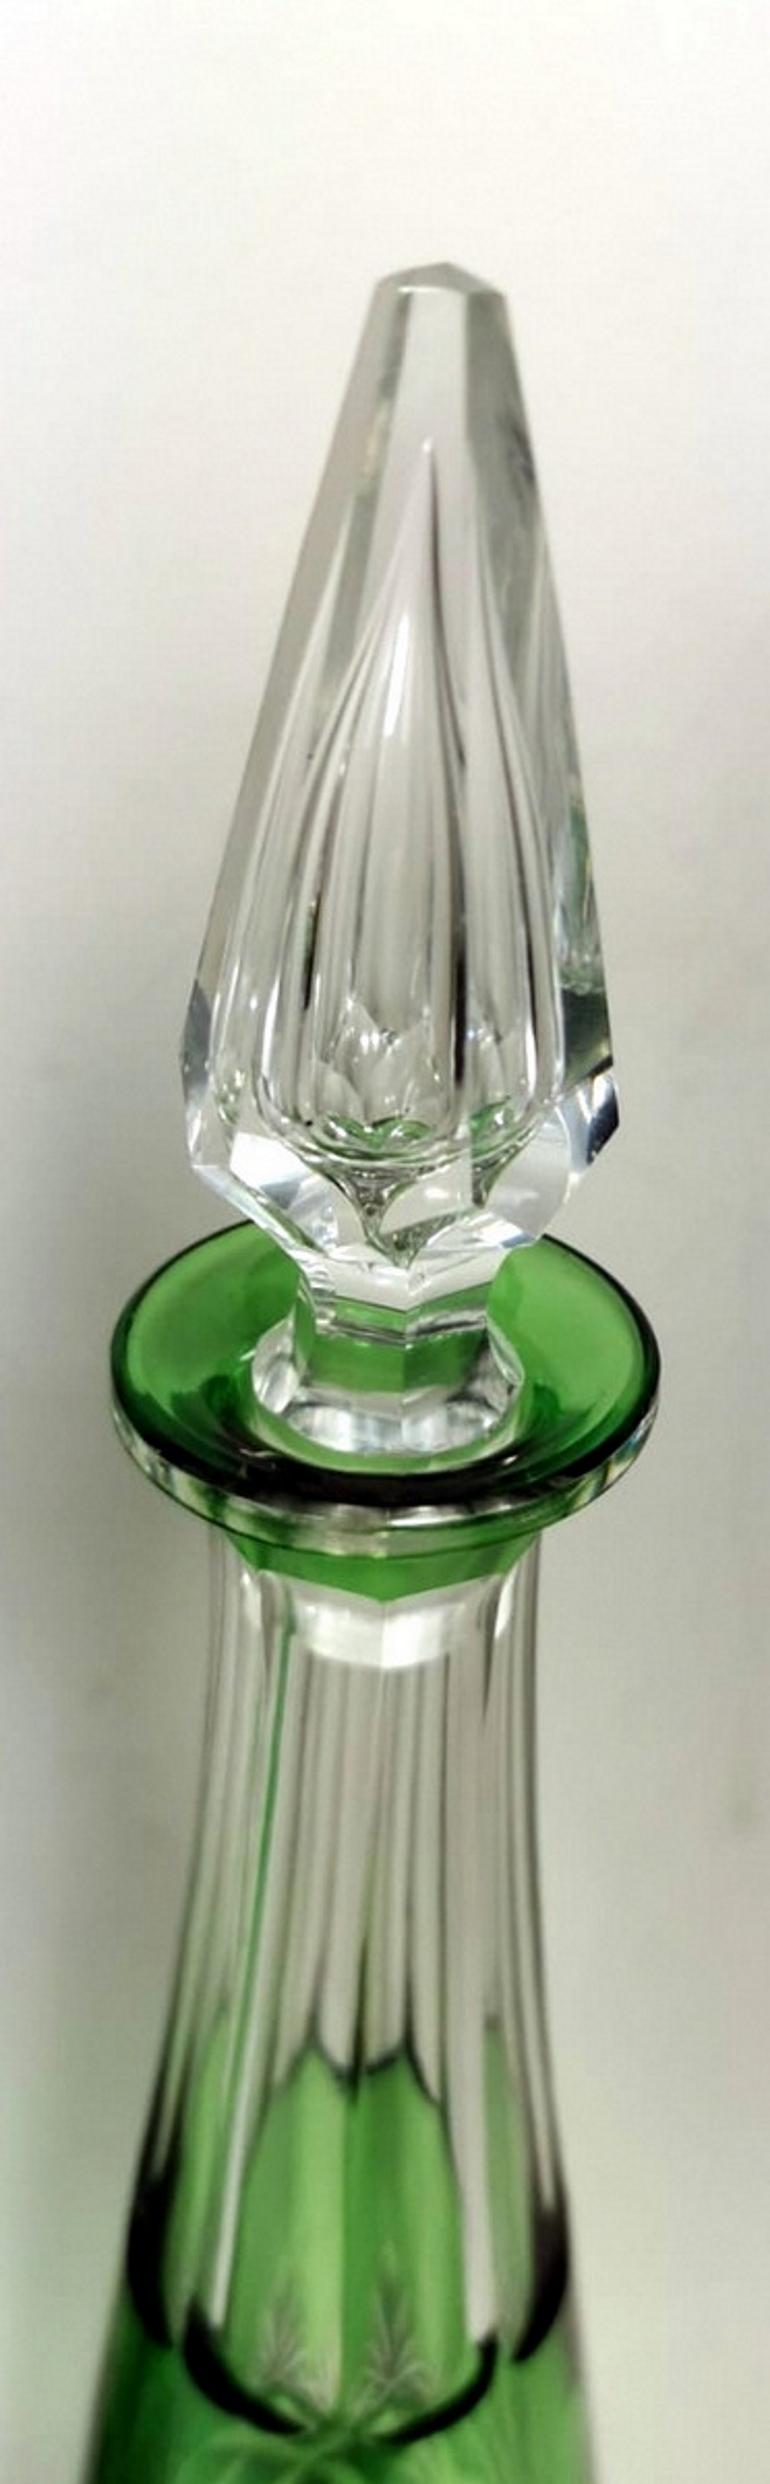 Pair of French  Green Lead and Handcut Crystal Decanter   1